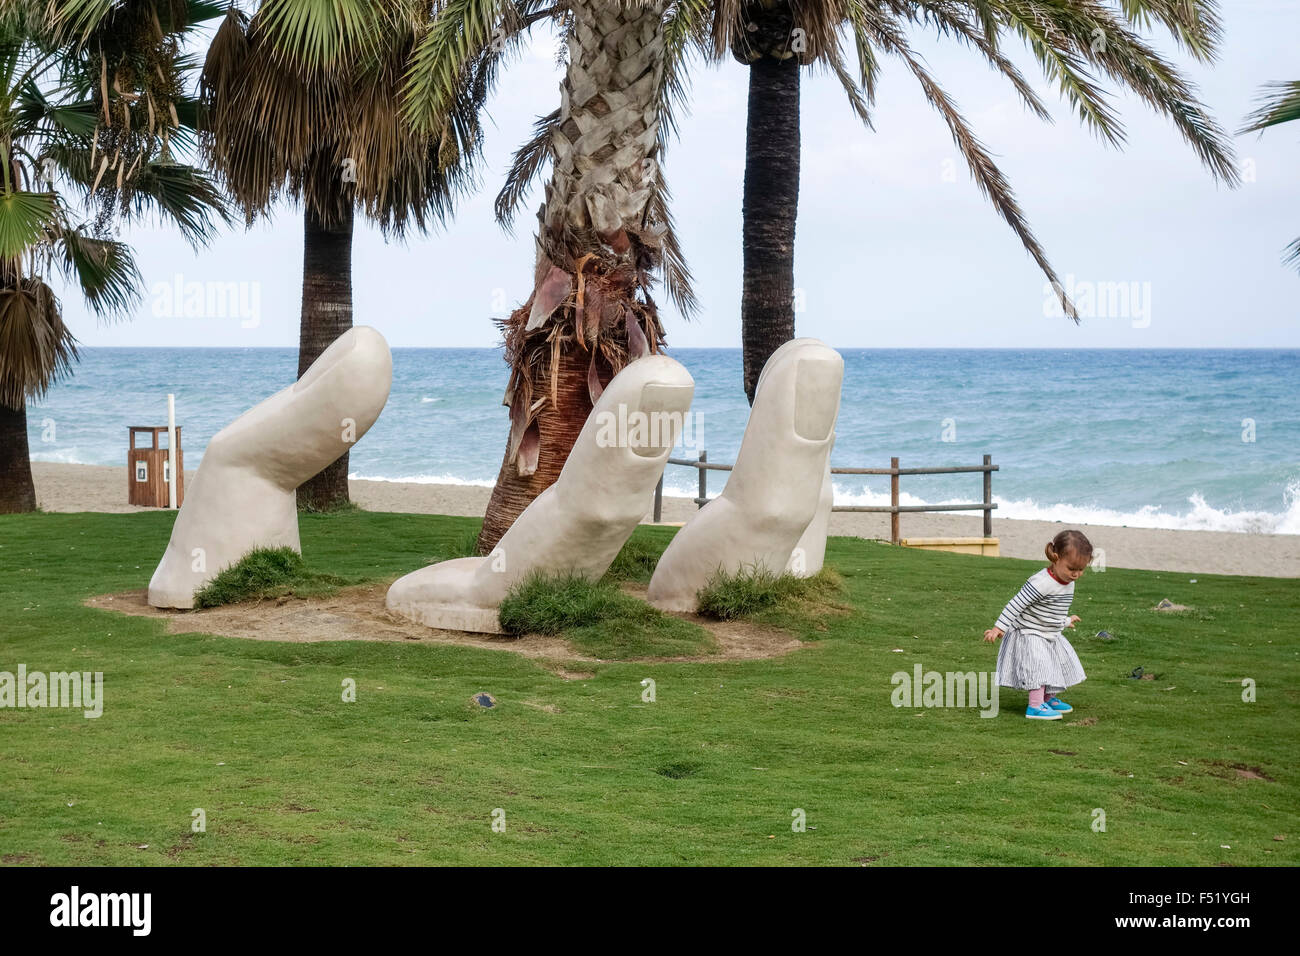 Statue caring open hand around palm tree, mediterranean beach, Andalusia, Fuengirola, Southern Spain. Stock Photo